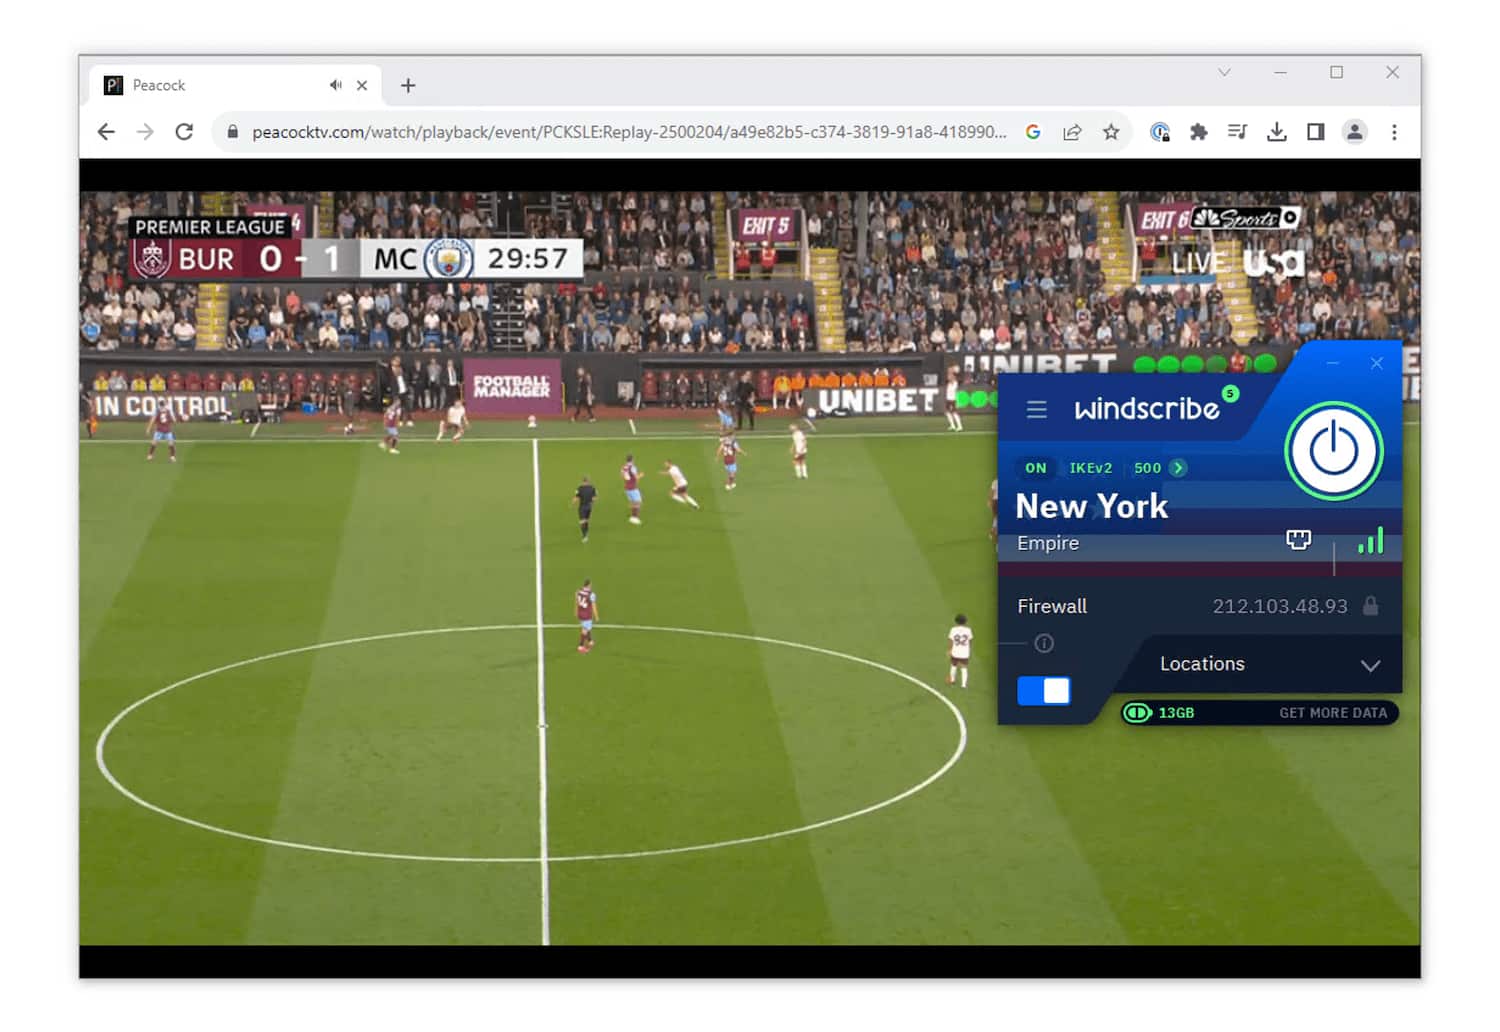 How to Watch Premier League in UK Legal Live Streams